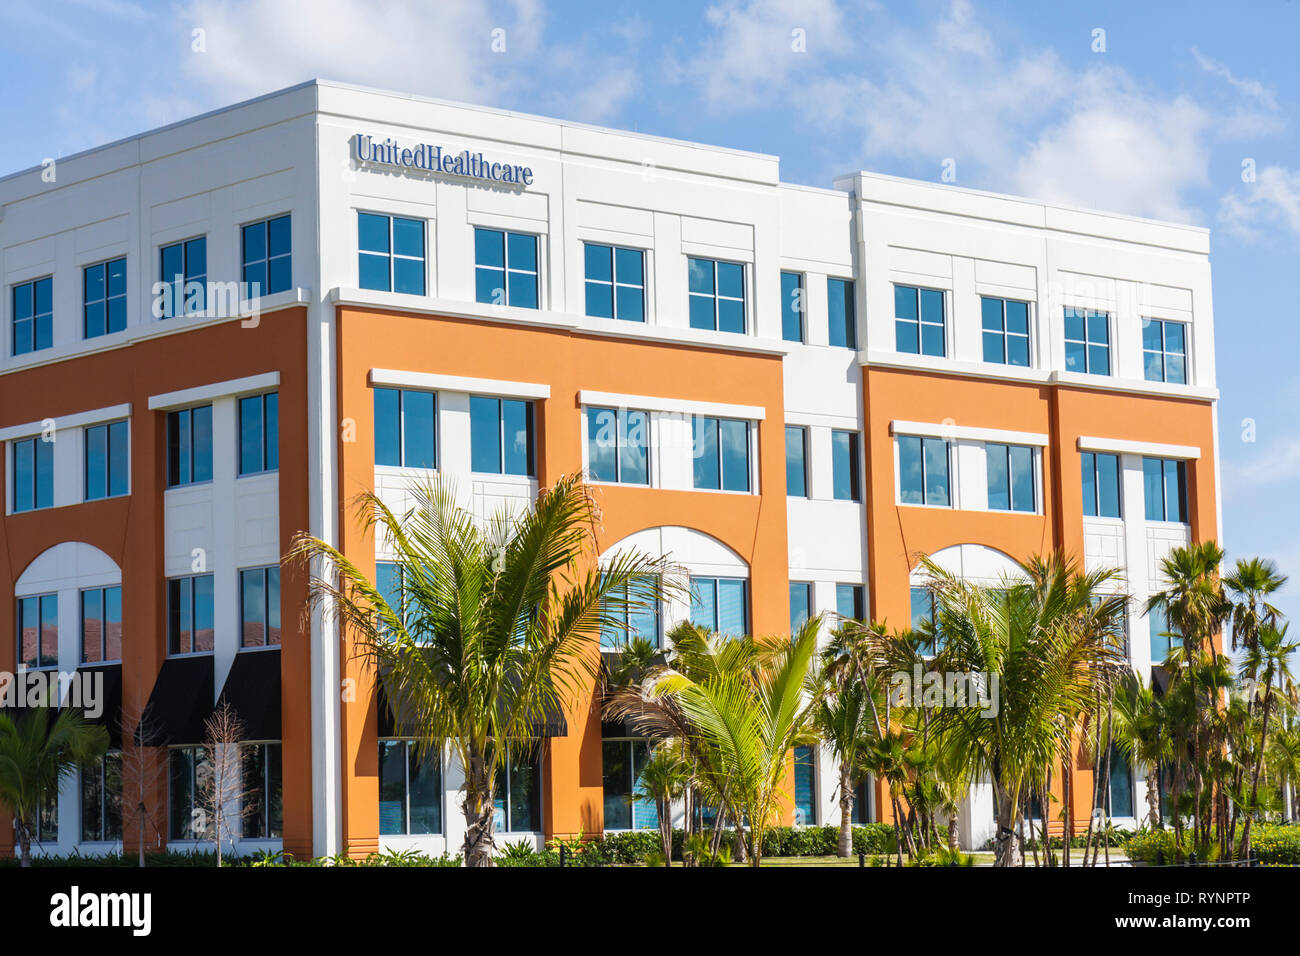 Florida Miramar,United Healthcare,medical,health,insurance,managed health care,company,insurer,commercial real estate,building,landscaping,palm trees, Stock Photo